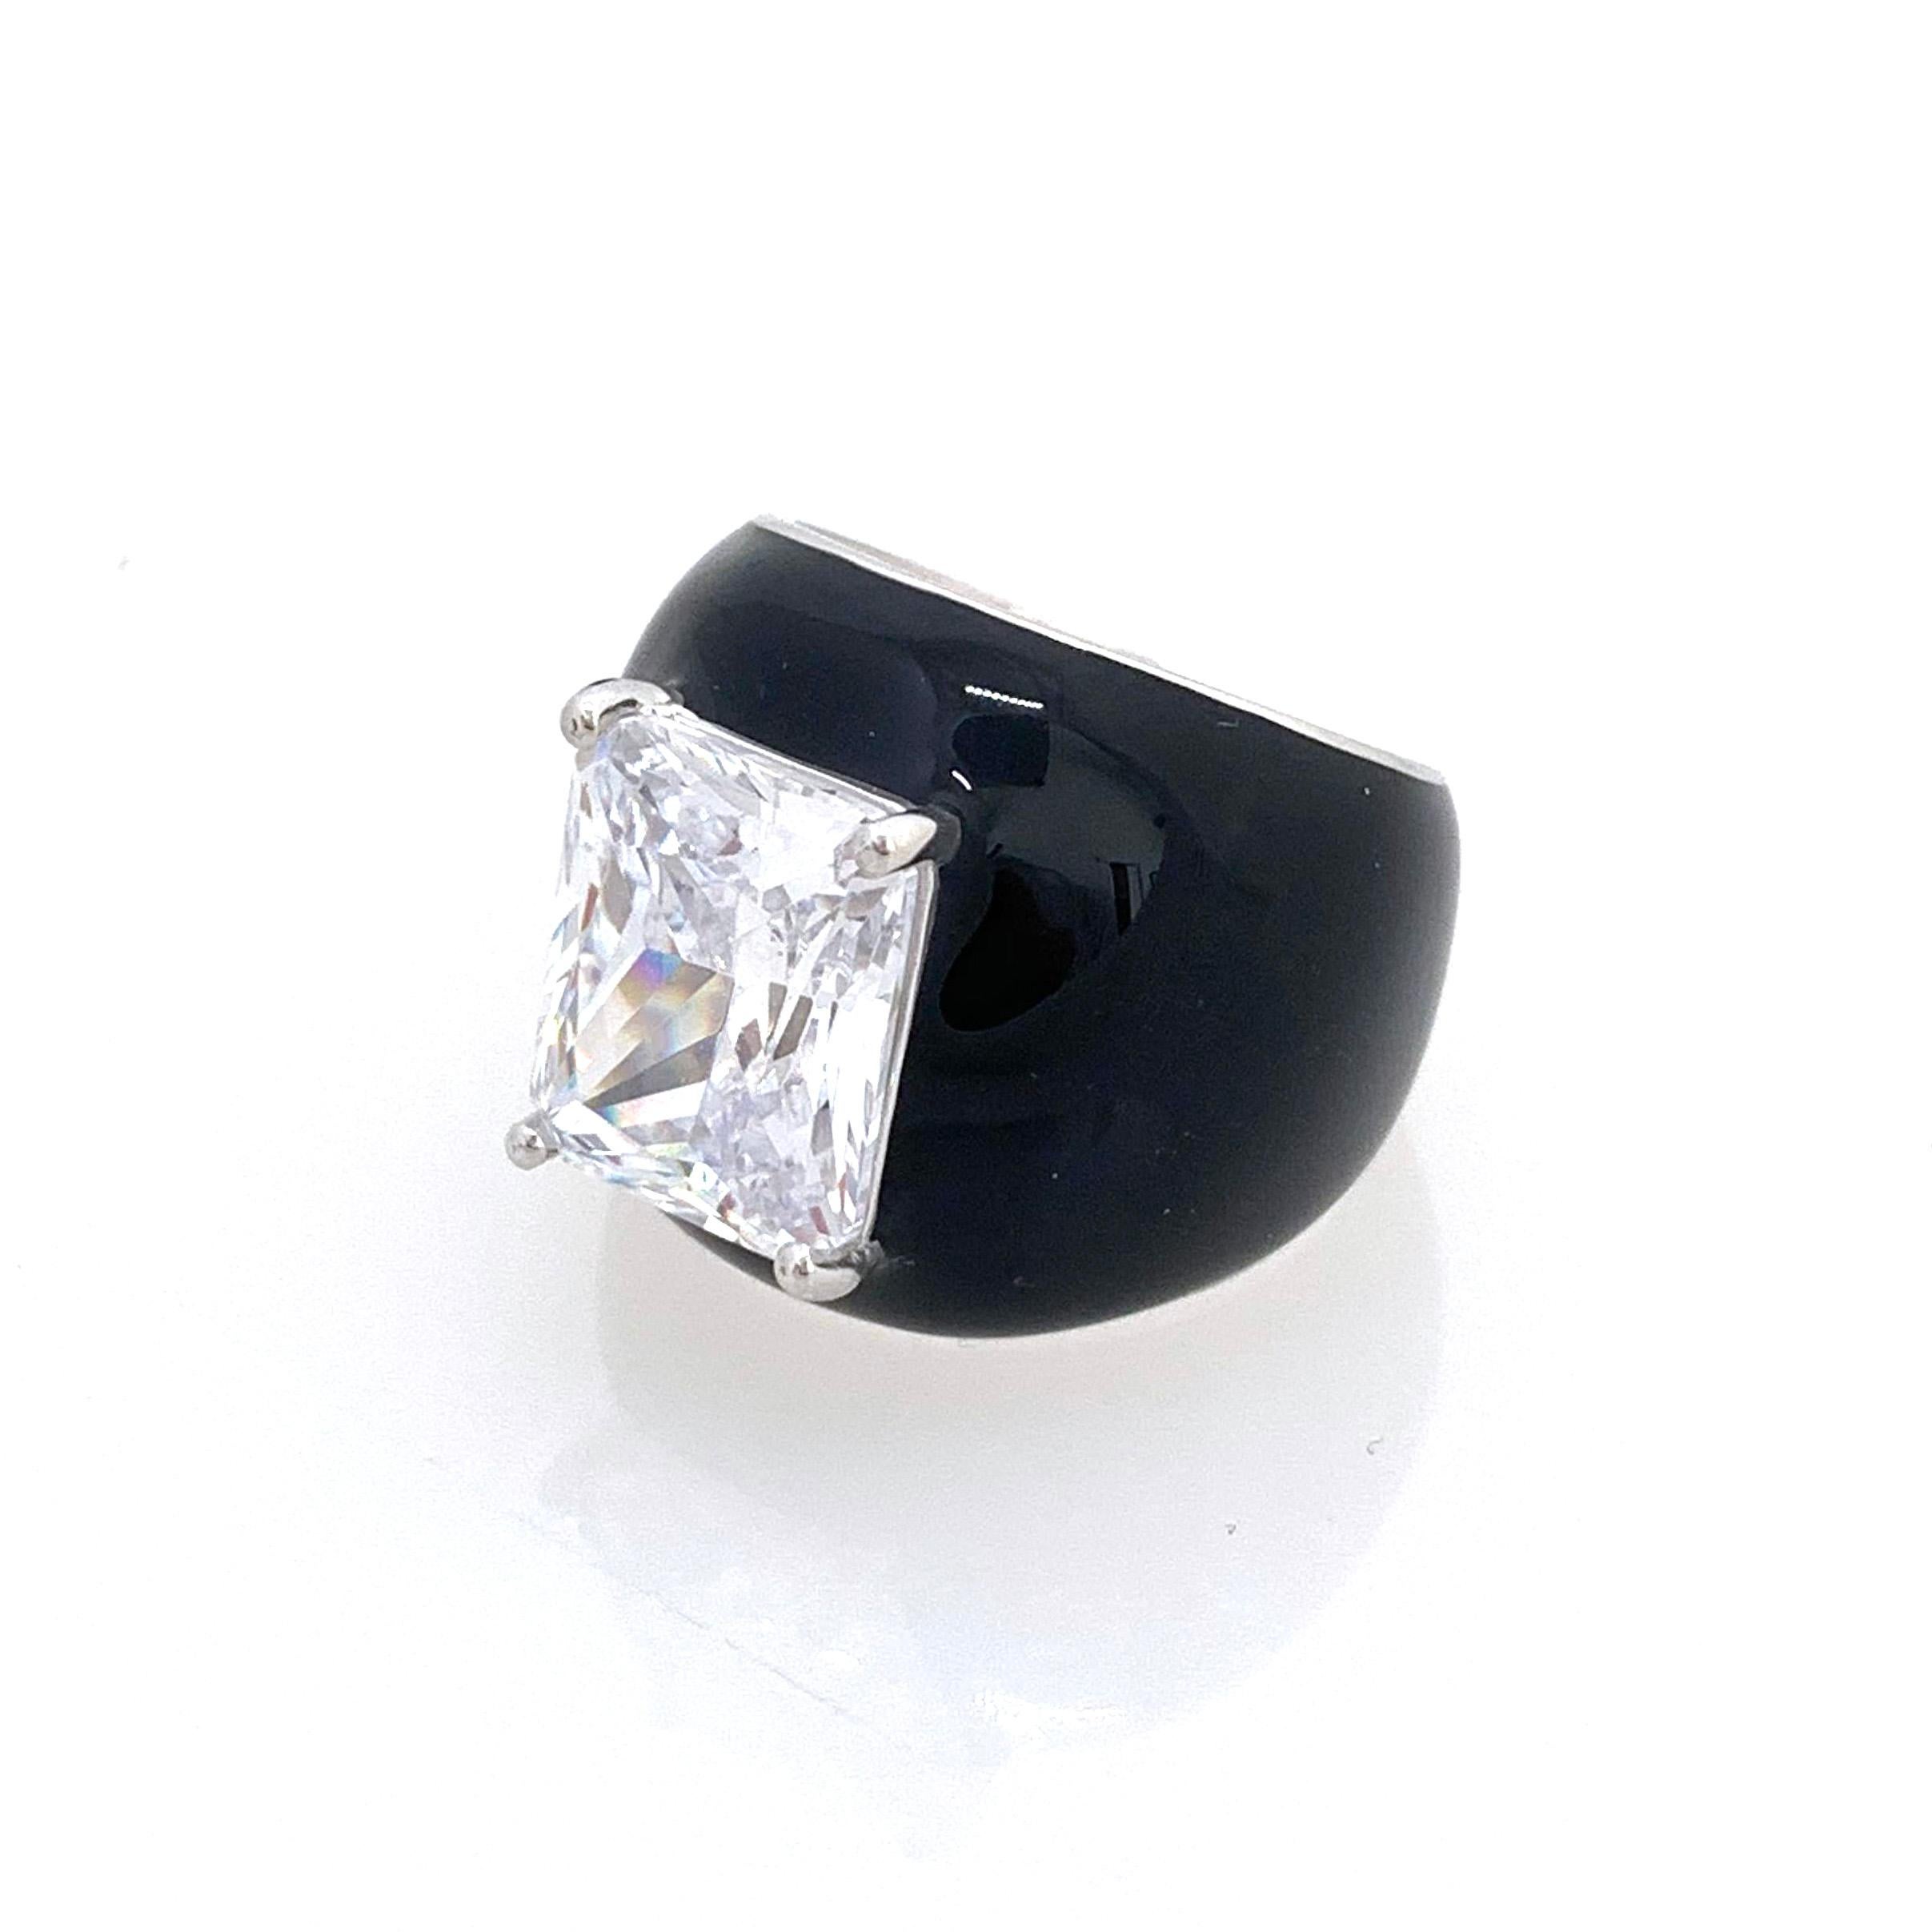 Bijoux Num Faux Diamond Black Enamel Bombe Dome Ring

This bold cocktail ring features beautiful top quality 6ct radiant-cut faux diamond cubic zirconia, handset in platinum rhodium plated sterling silver. The entire ring is sheathed in shiny black